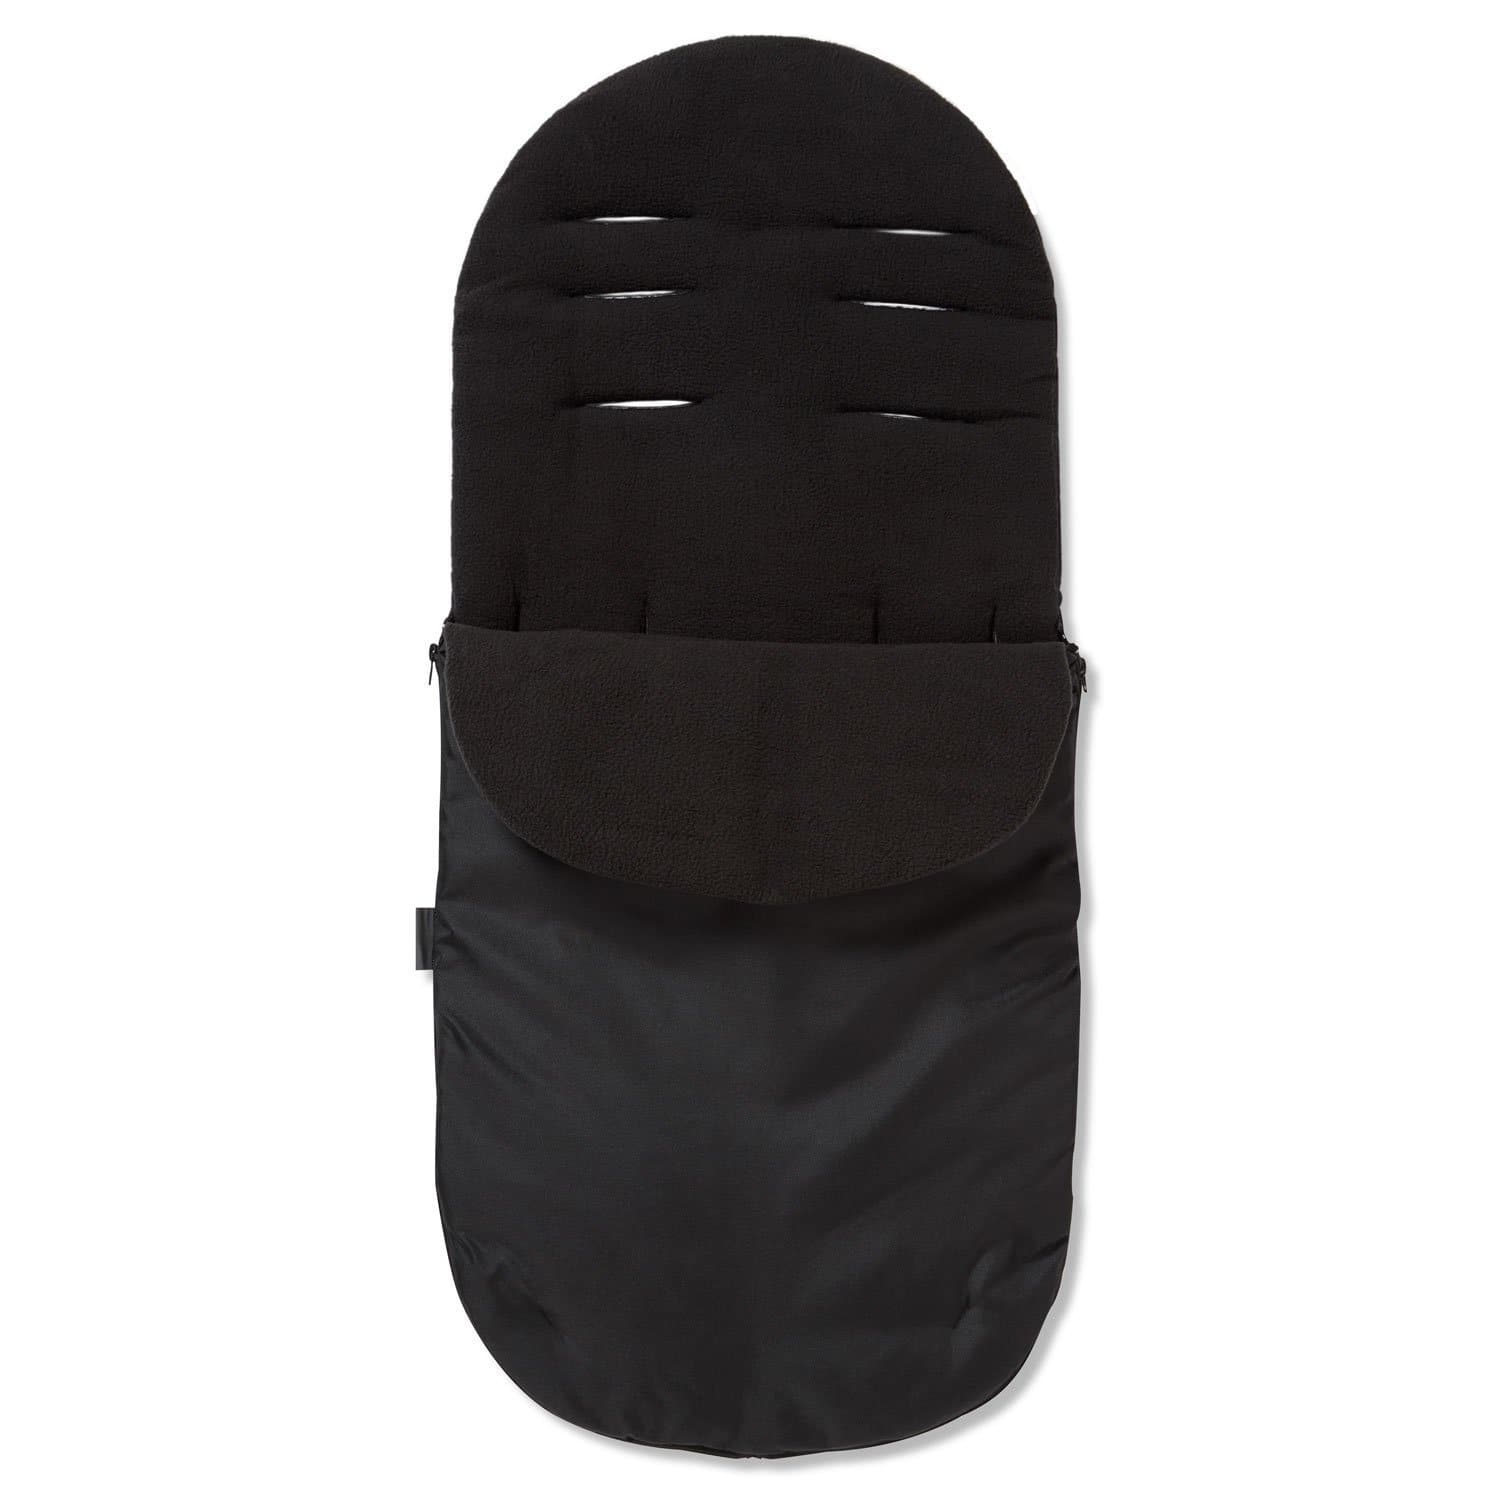 Footmuff / Cosy Toes Compatible with Roma - Black / Fits All Models | For Your Little One